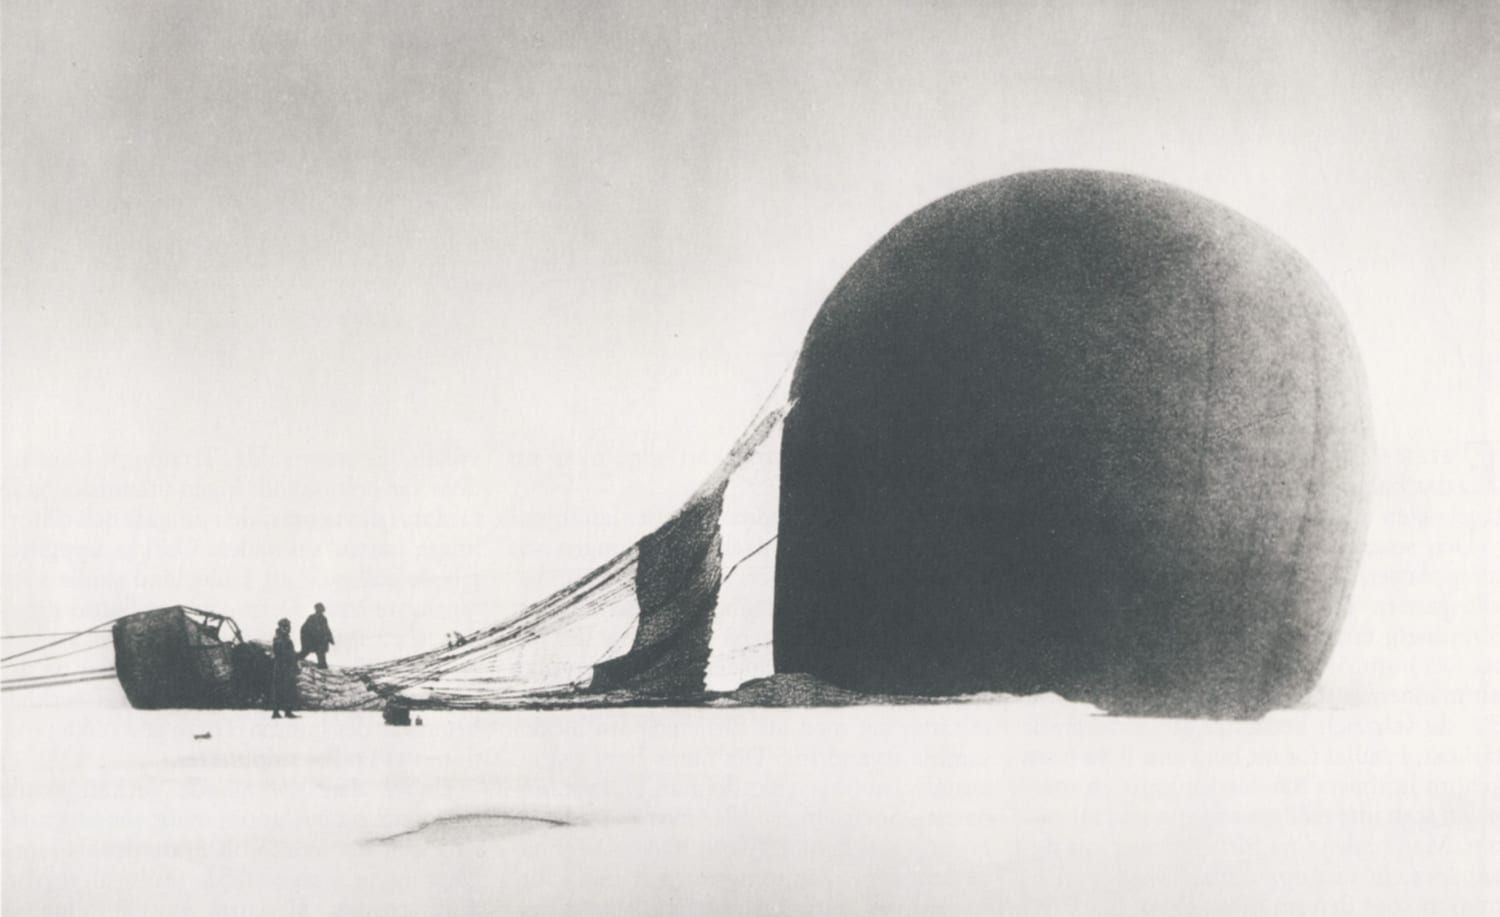 "Our situation has most definitely not improved " Engineer Andrée writes in his log after crashing on arctic ice while attempting to cross the north pole with a hot air balloon. 1897